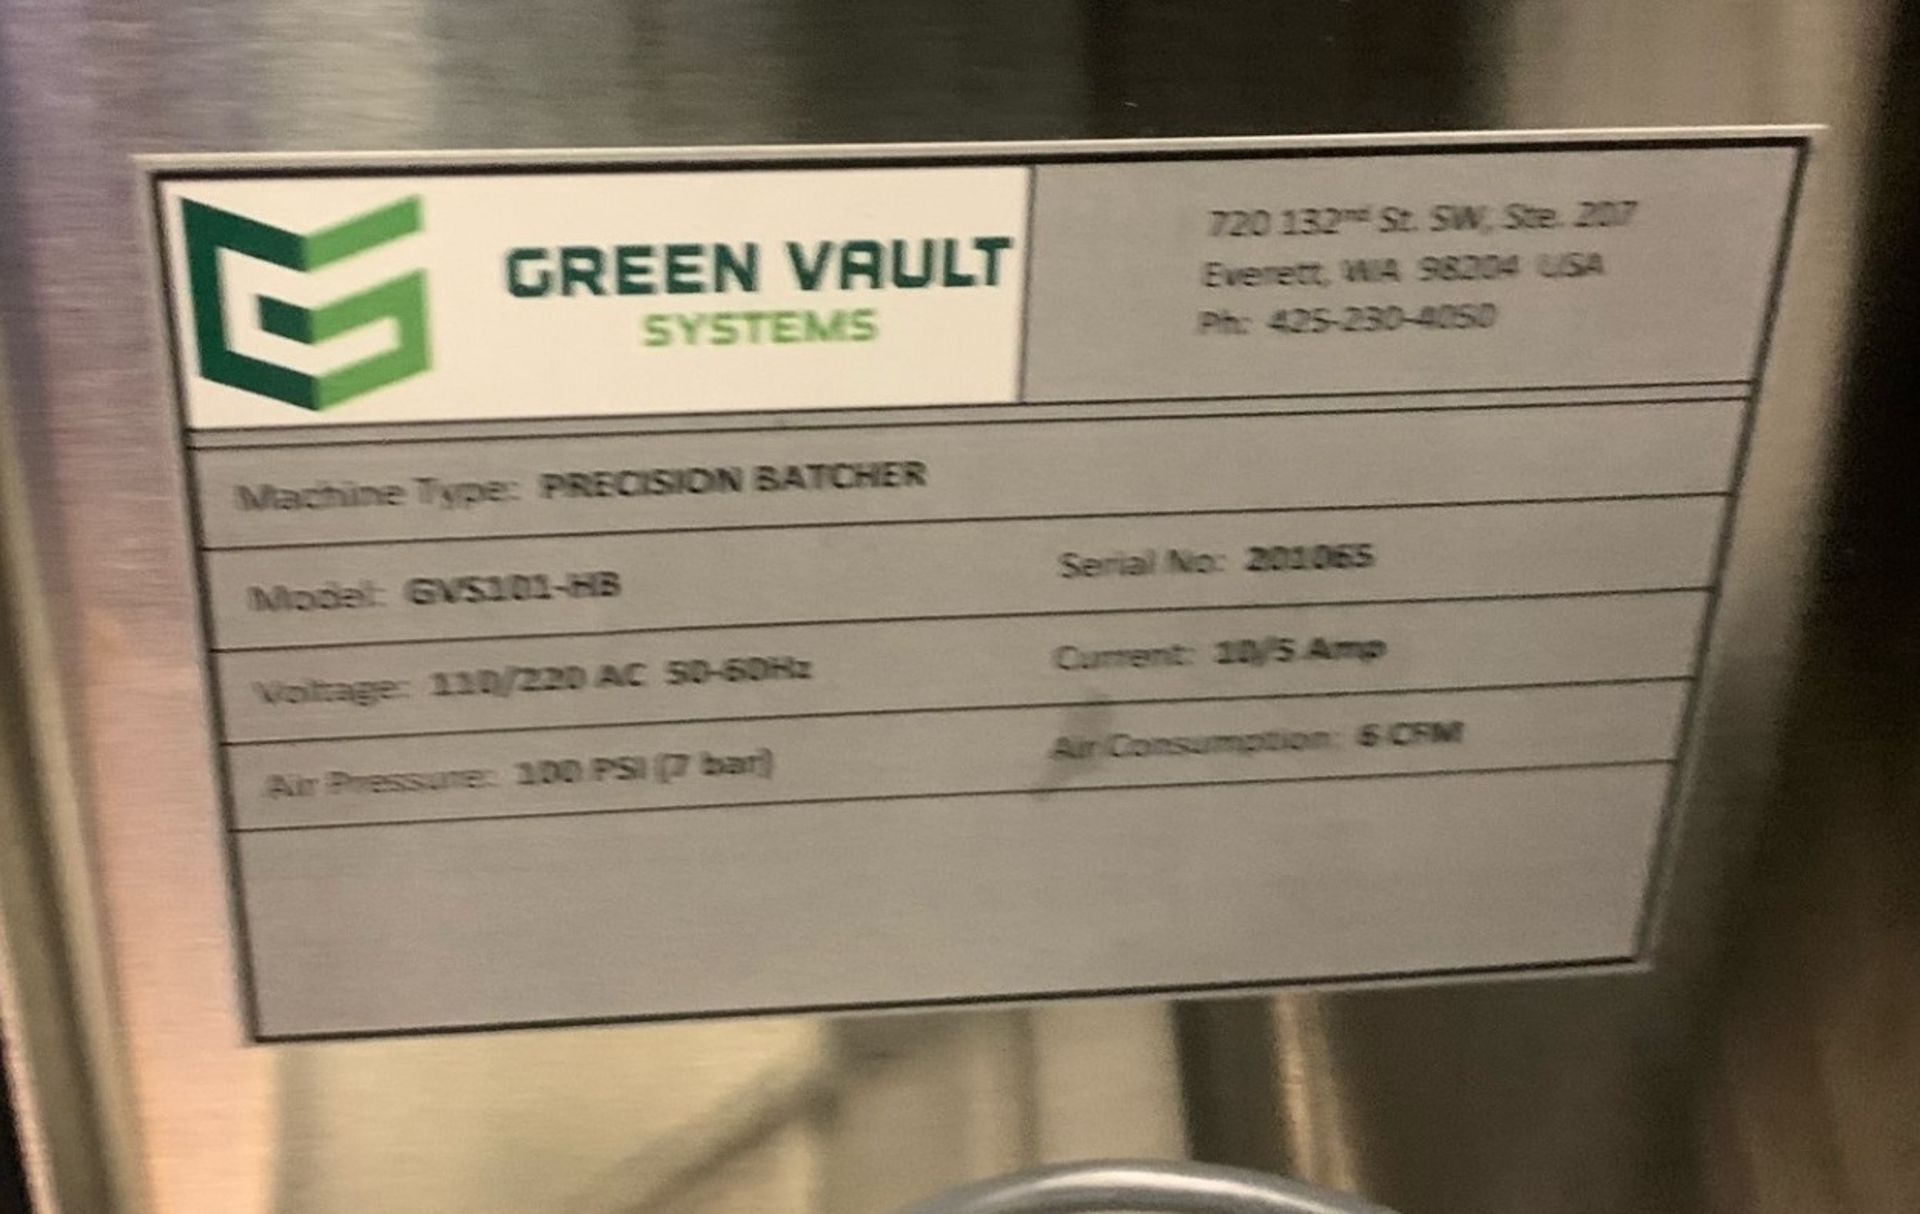 Used Green Vault Systems Precision Batcher. Model GVS101-HB - Image 2 of 19